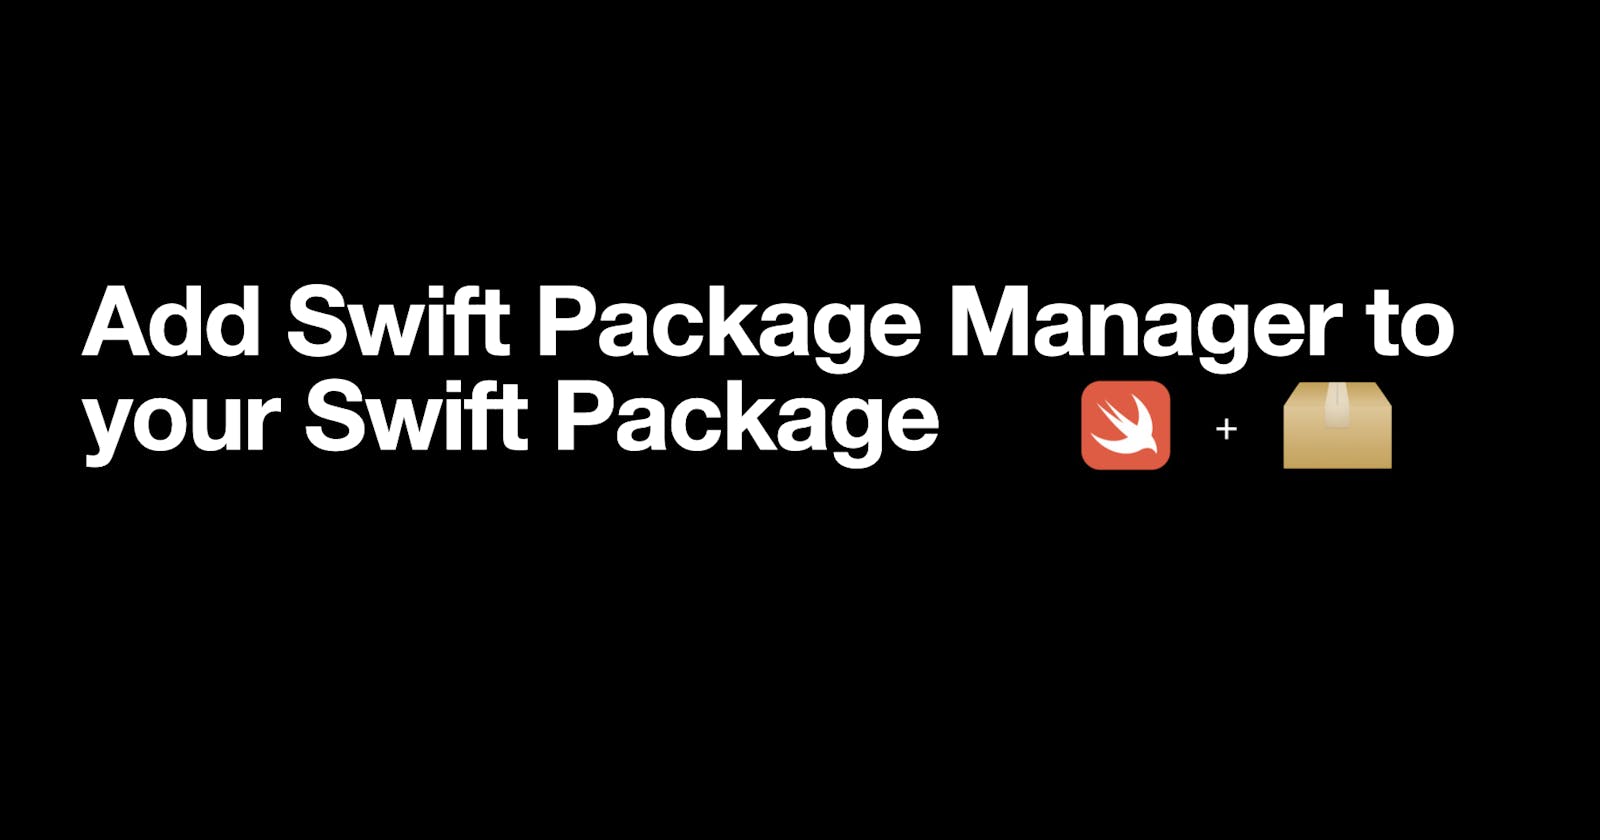 Use Swift Package Manager in your own Swift Package